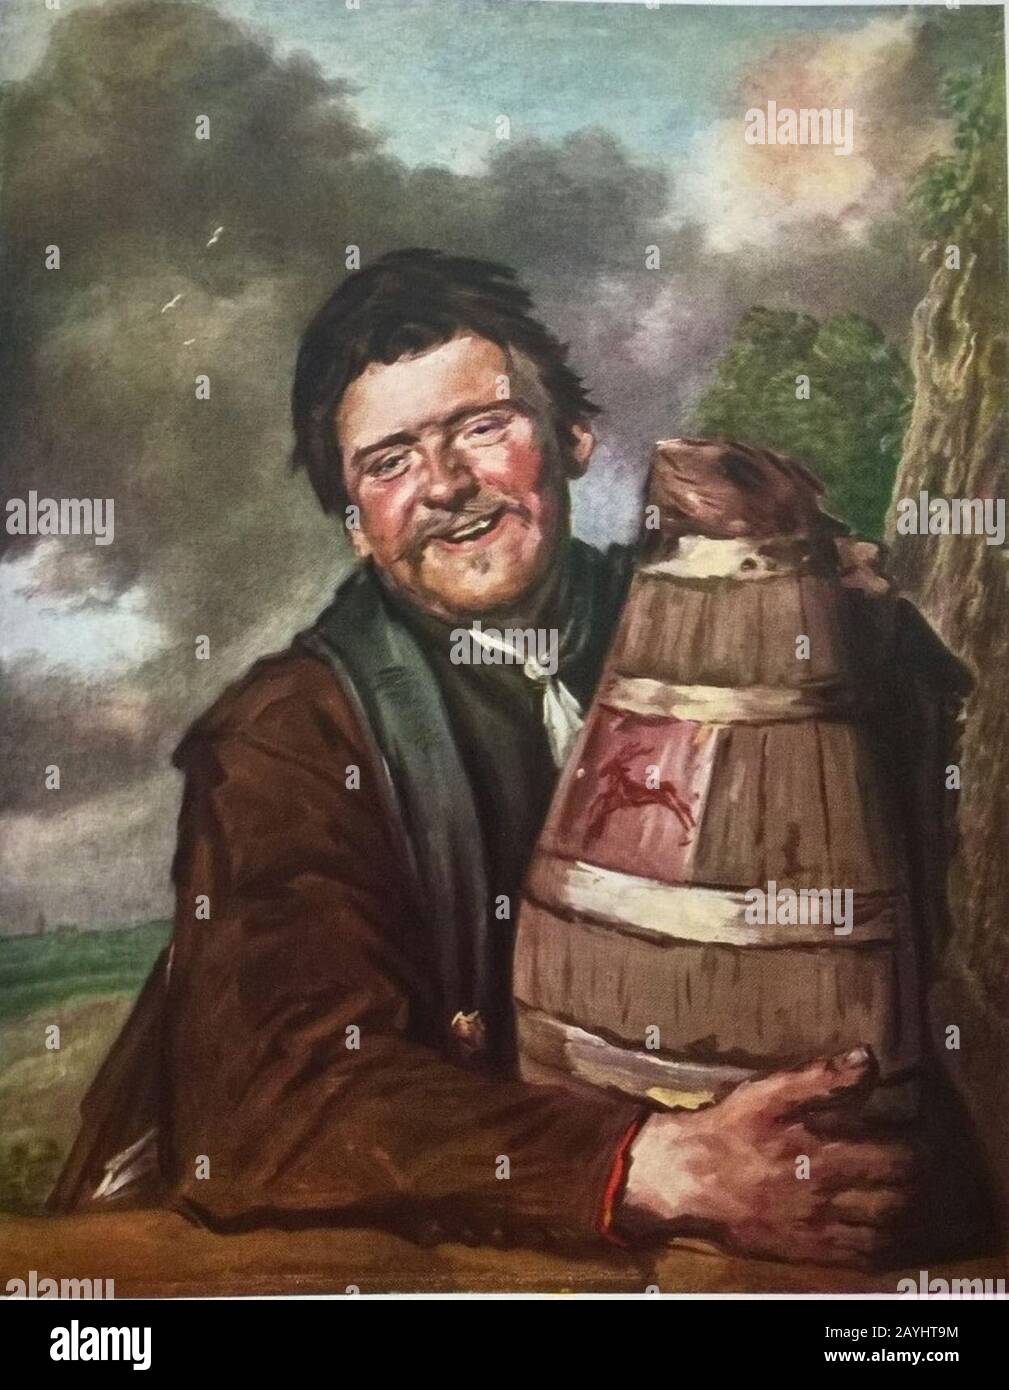 Frans Hals - portrait of a man holding a beer jug. Stock Photo